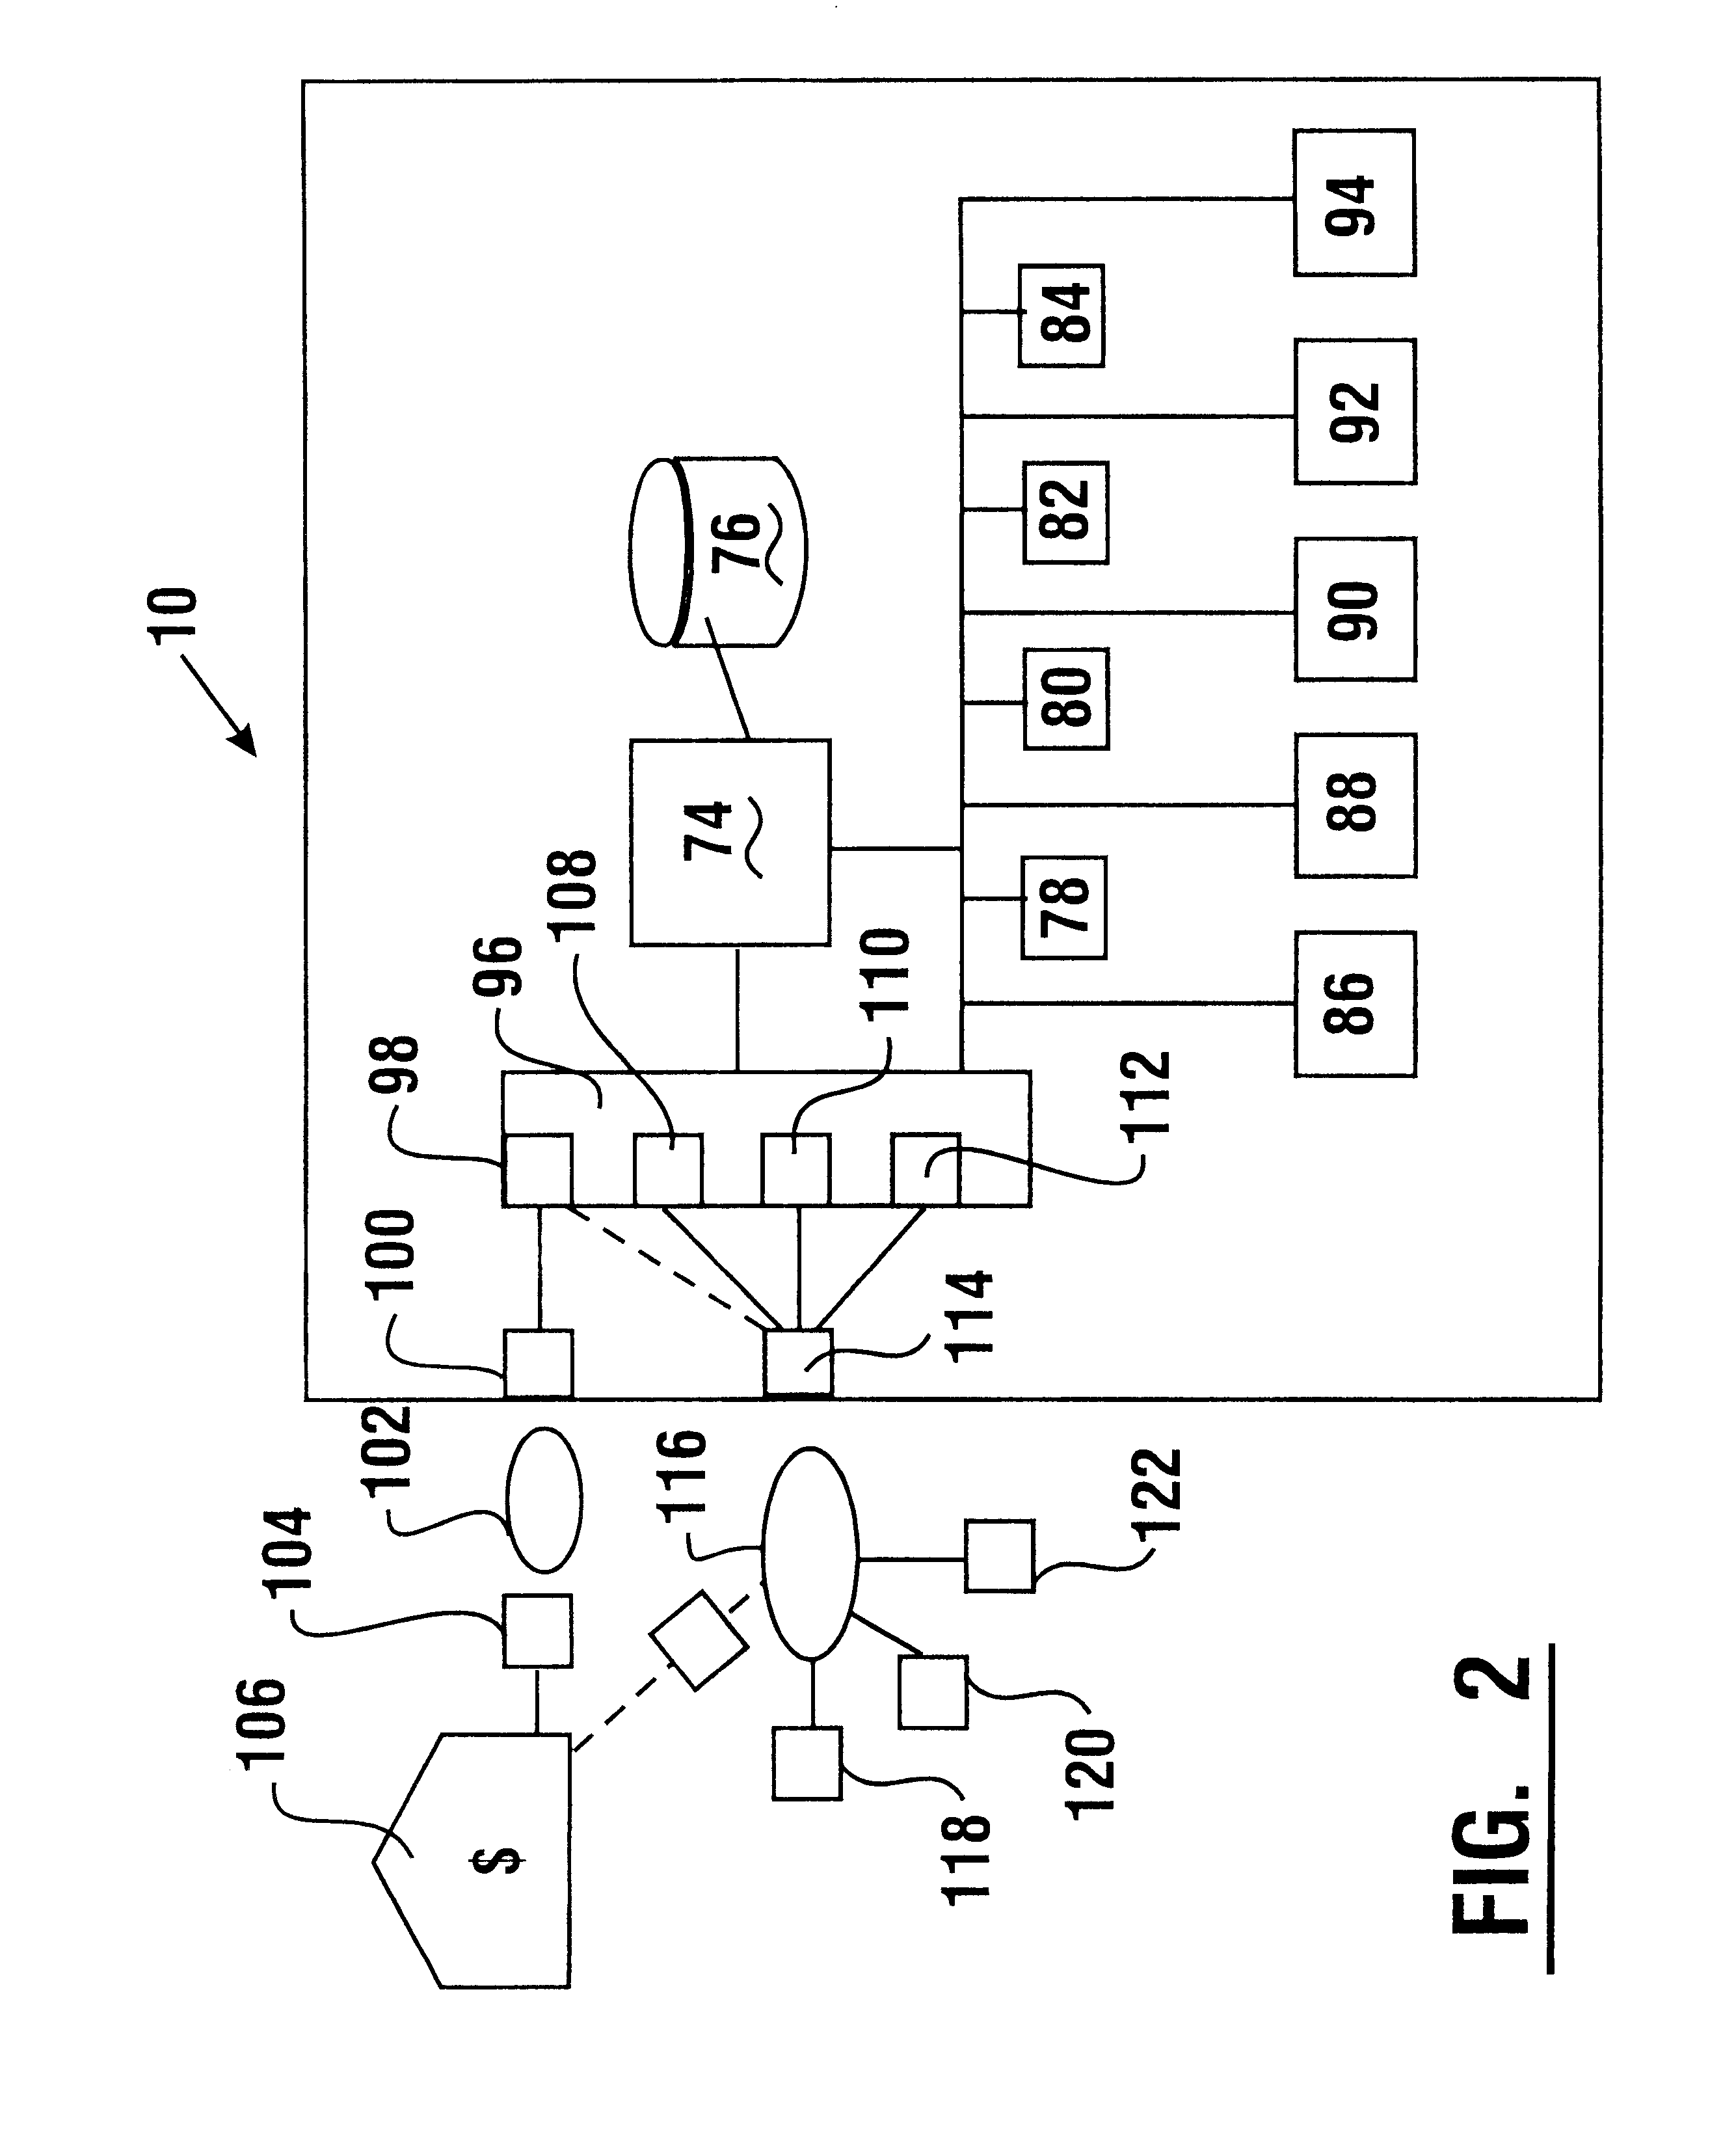 Automated merchant banking apparatus and method